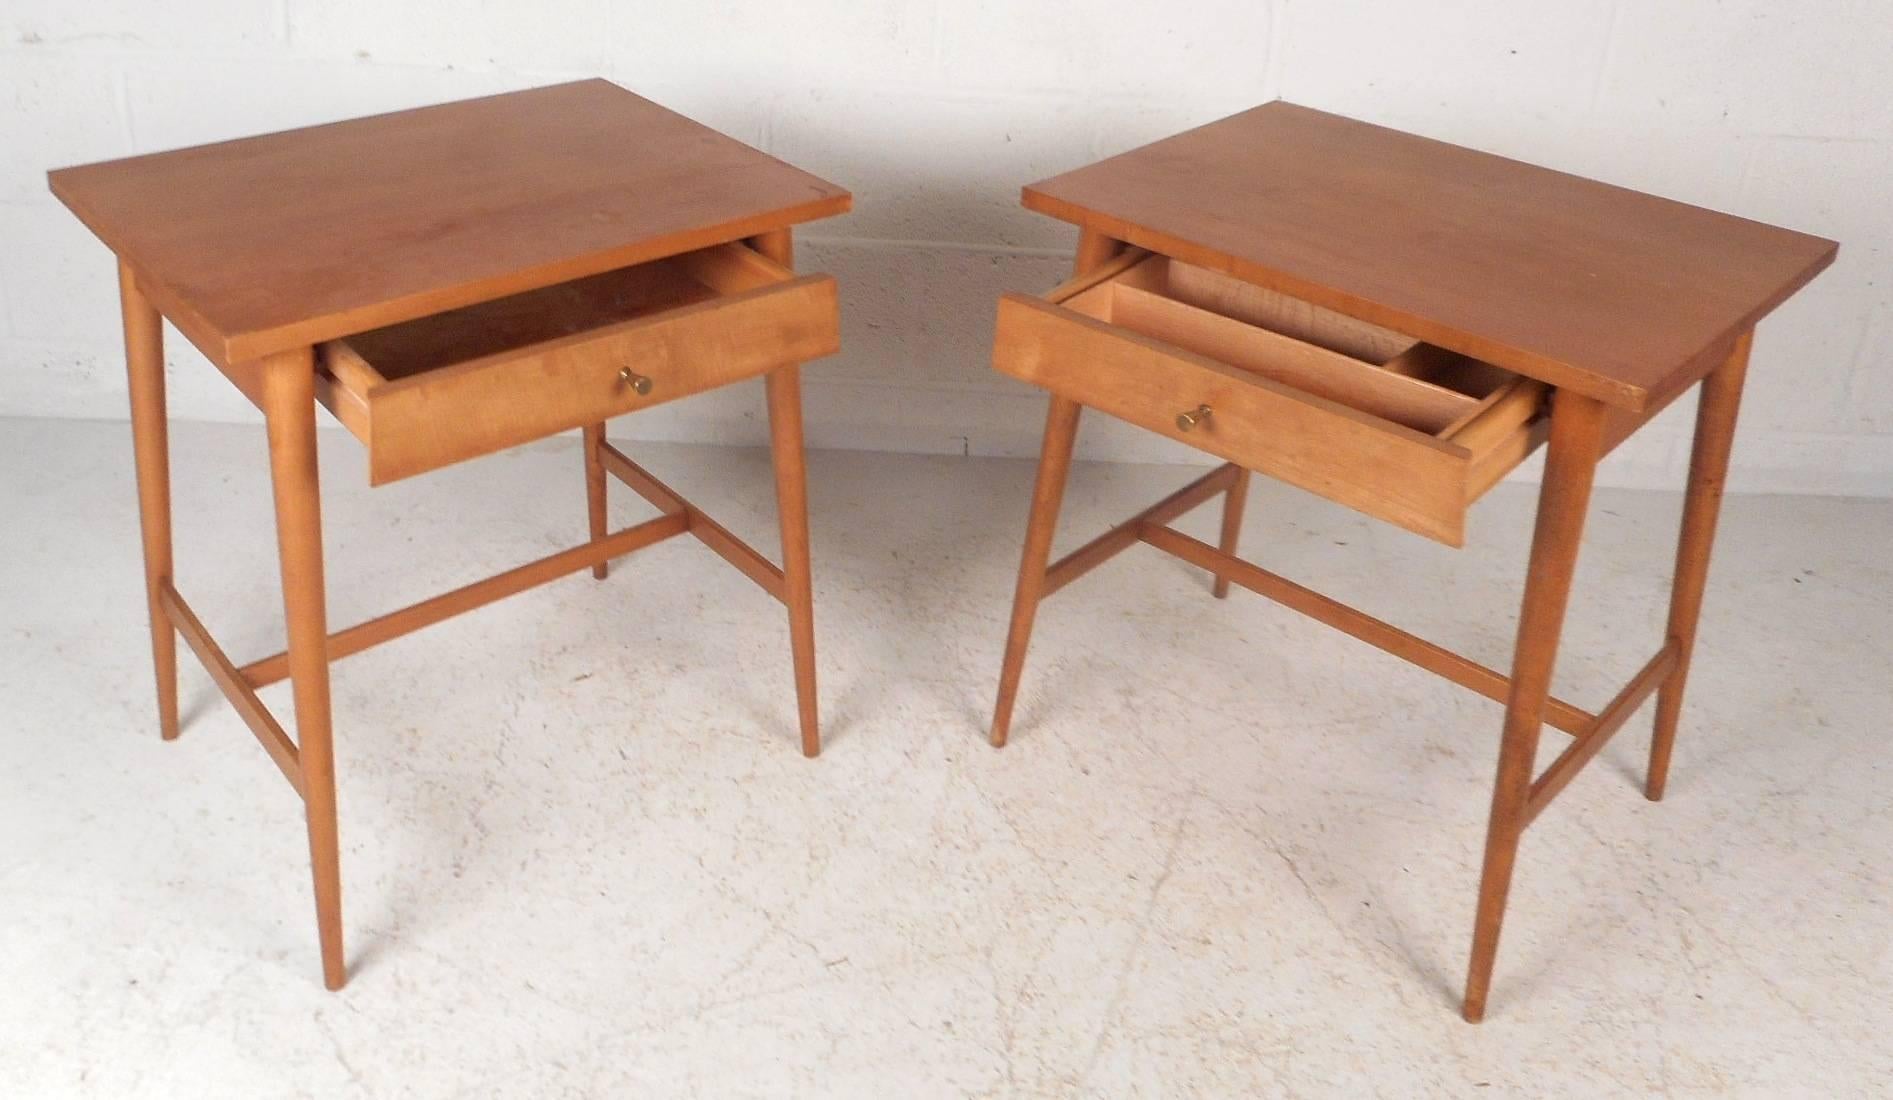 Brass Pair of Mid-Century Modern End Tables by Paul McCobb for Planner Group